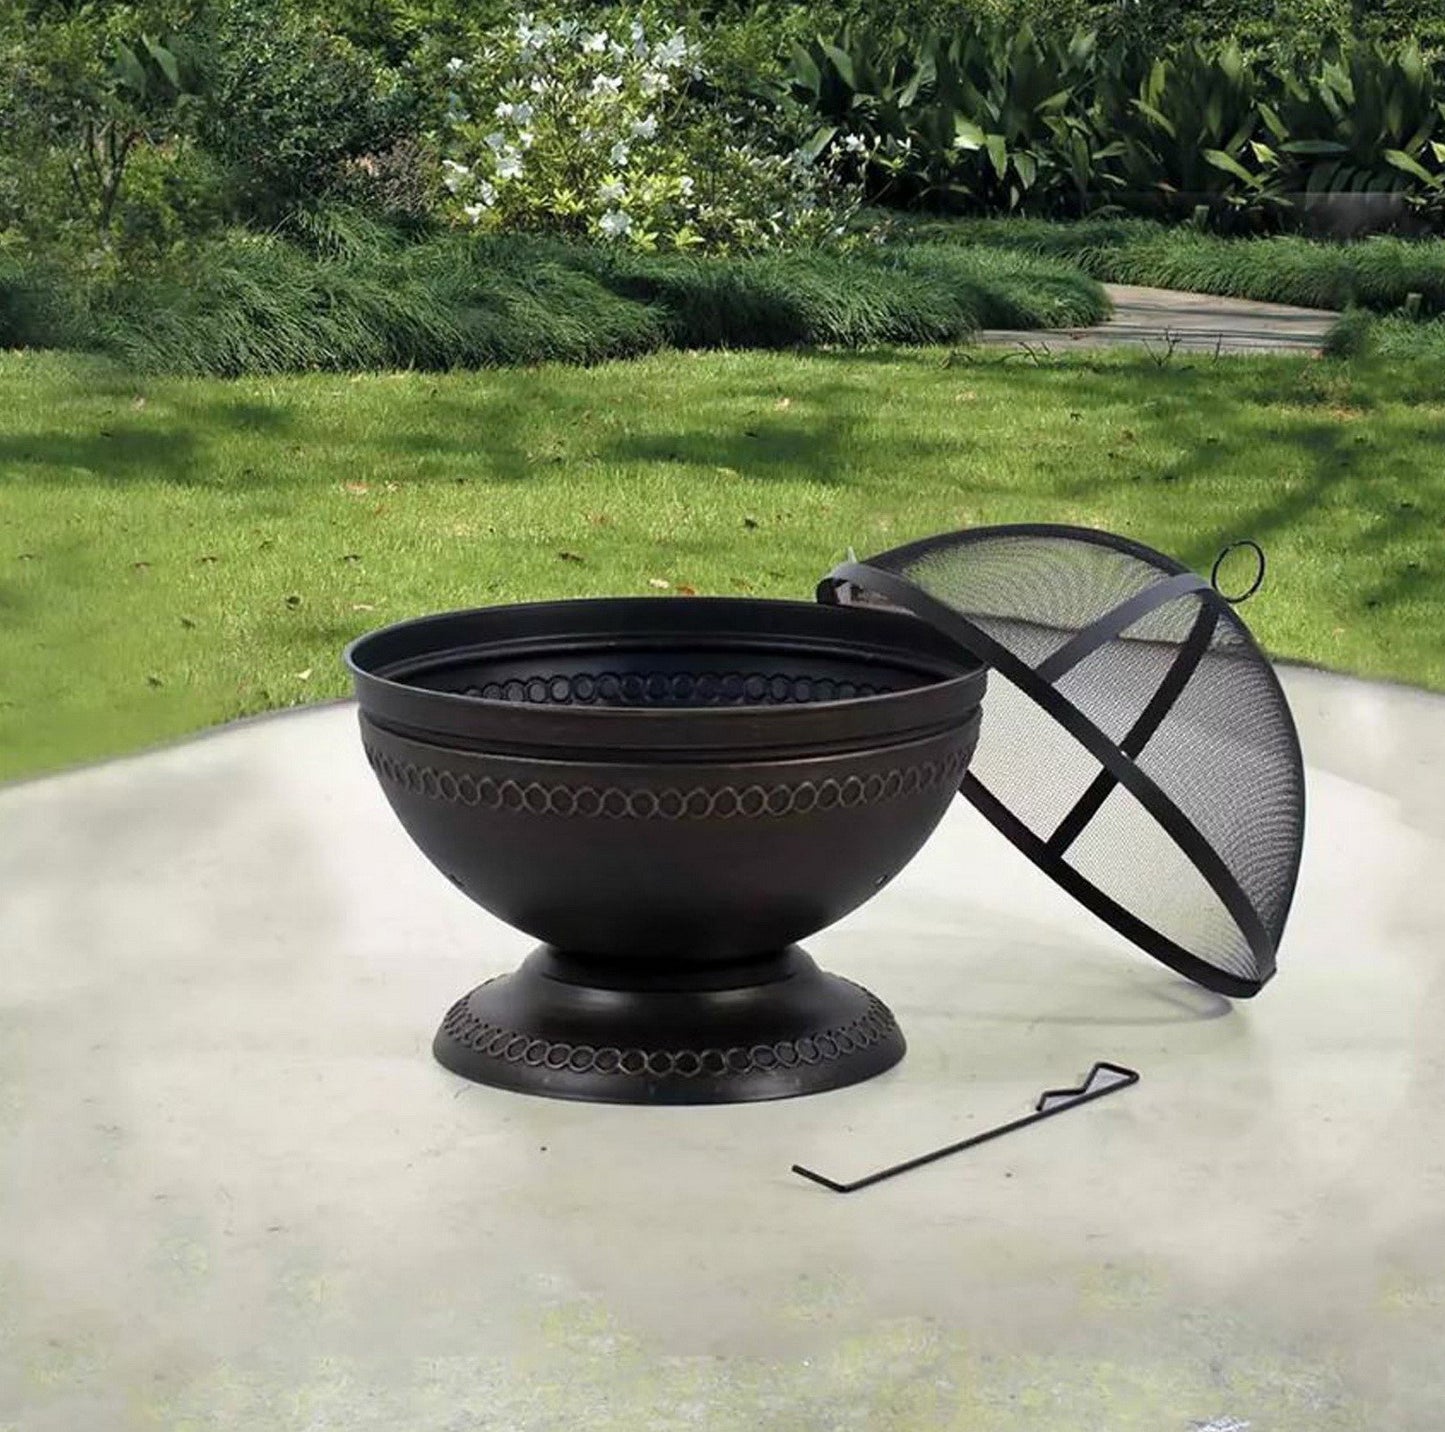 Deckmate Outdoor Steel Round Fire Pit With Mesh Spark Guard